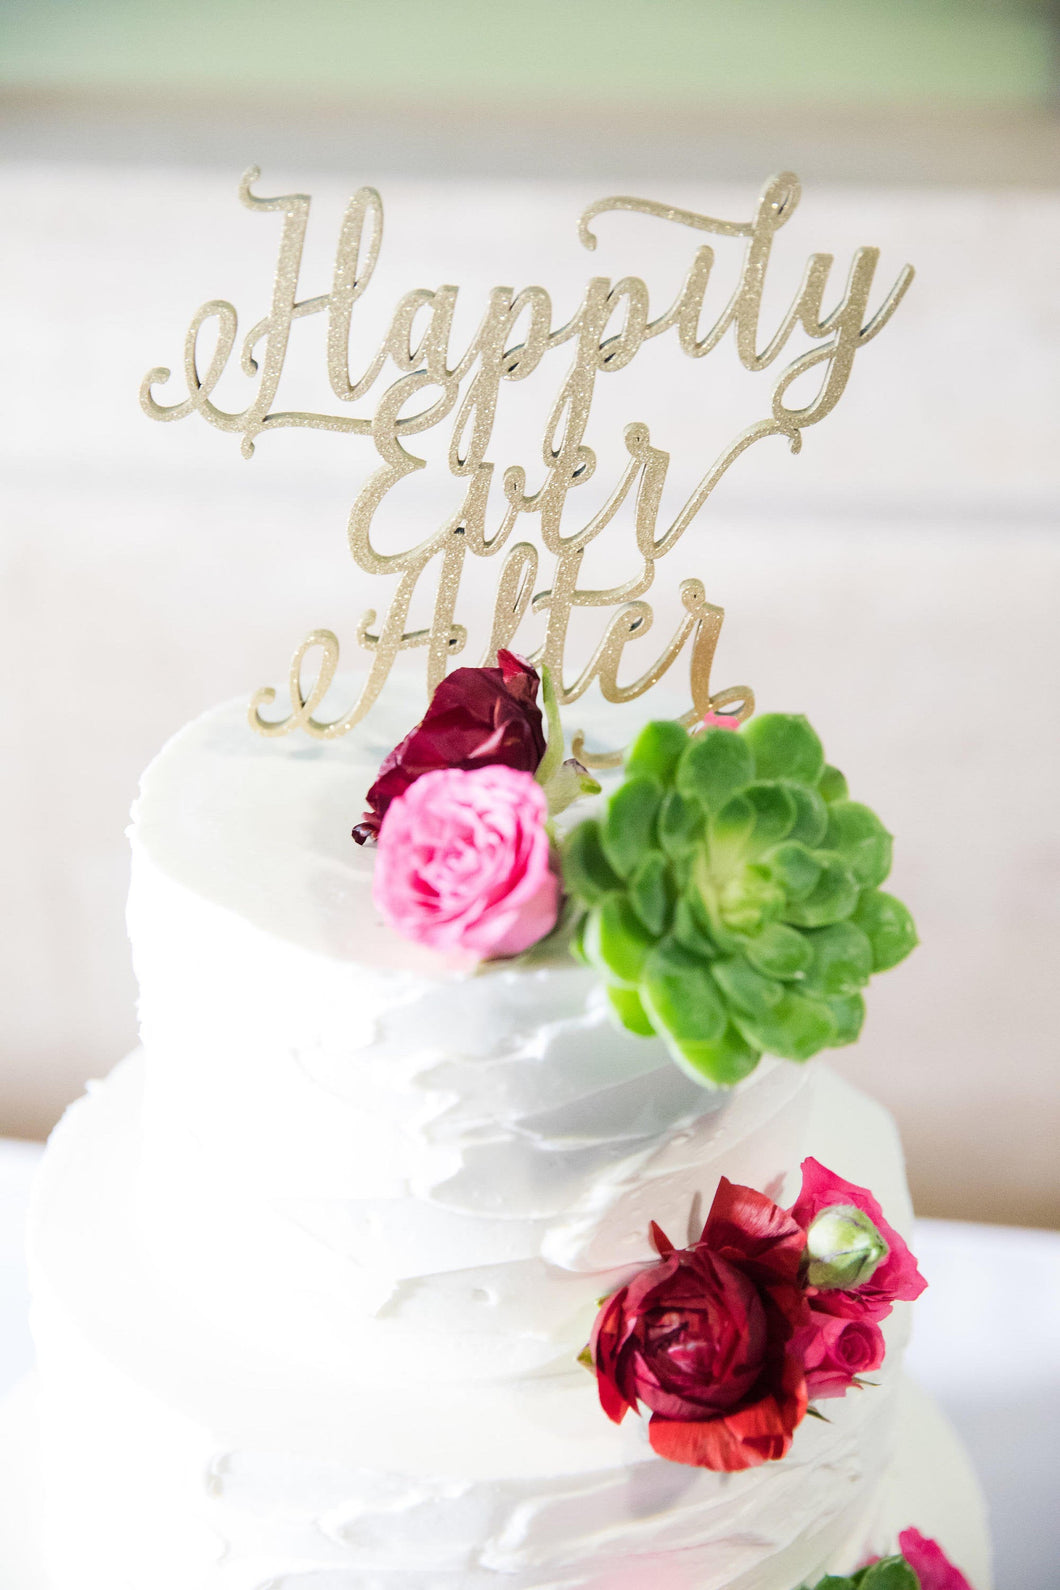 Happily Ever After Cake Topper, 6.5